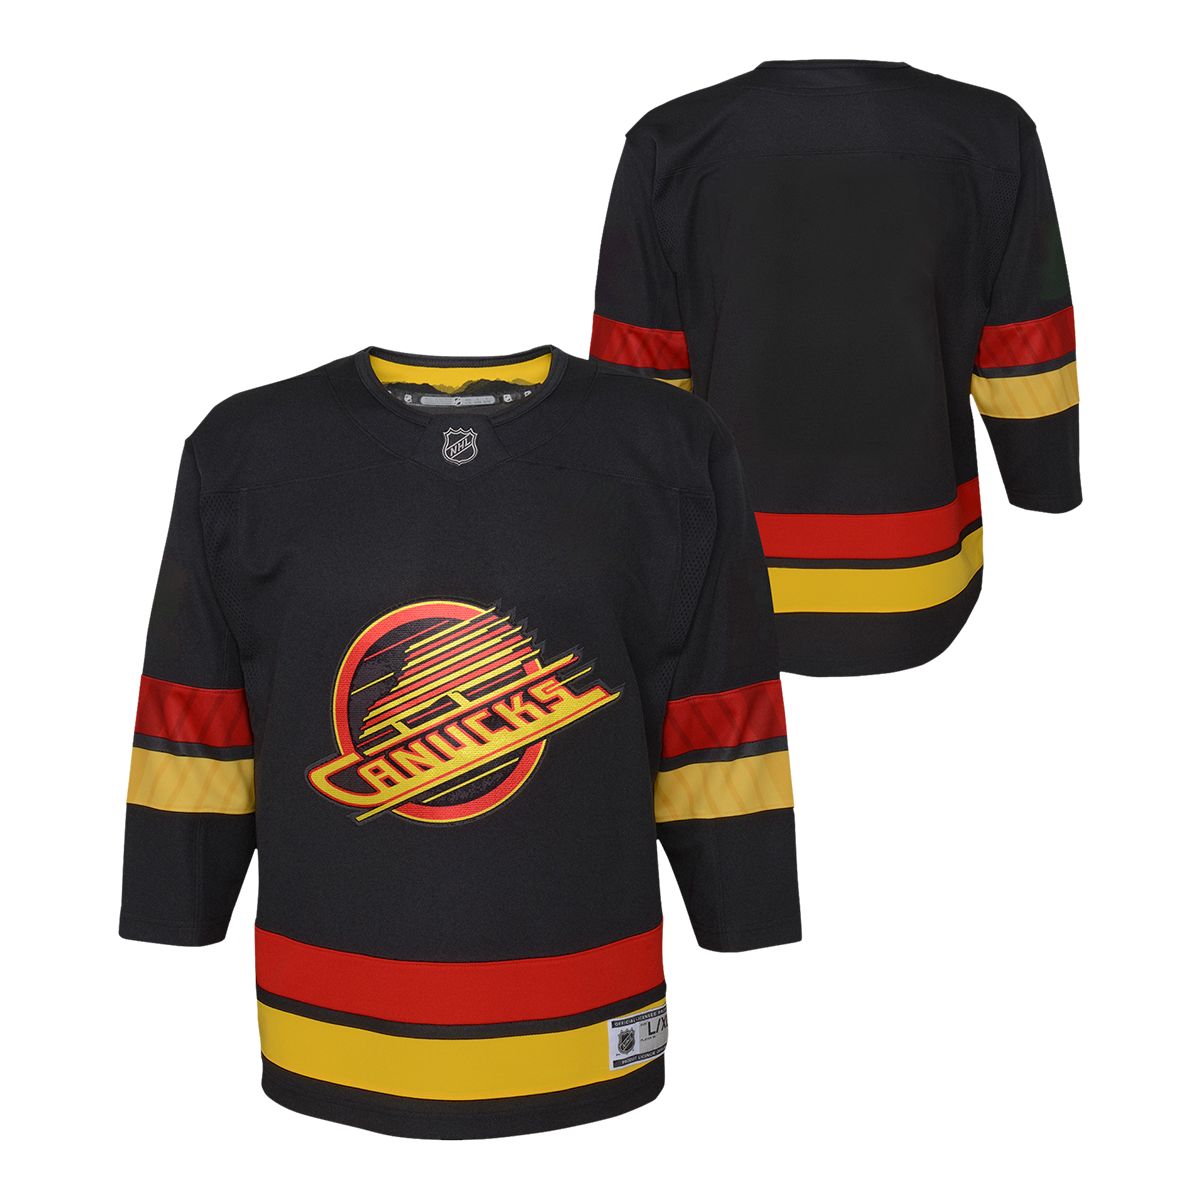 Vancouver Canucks Authentic Jerseys & Gear